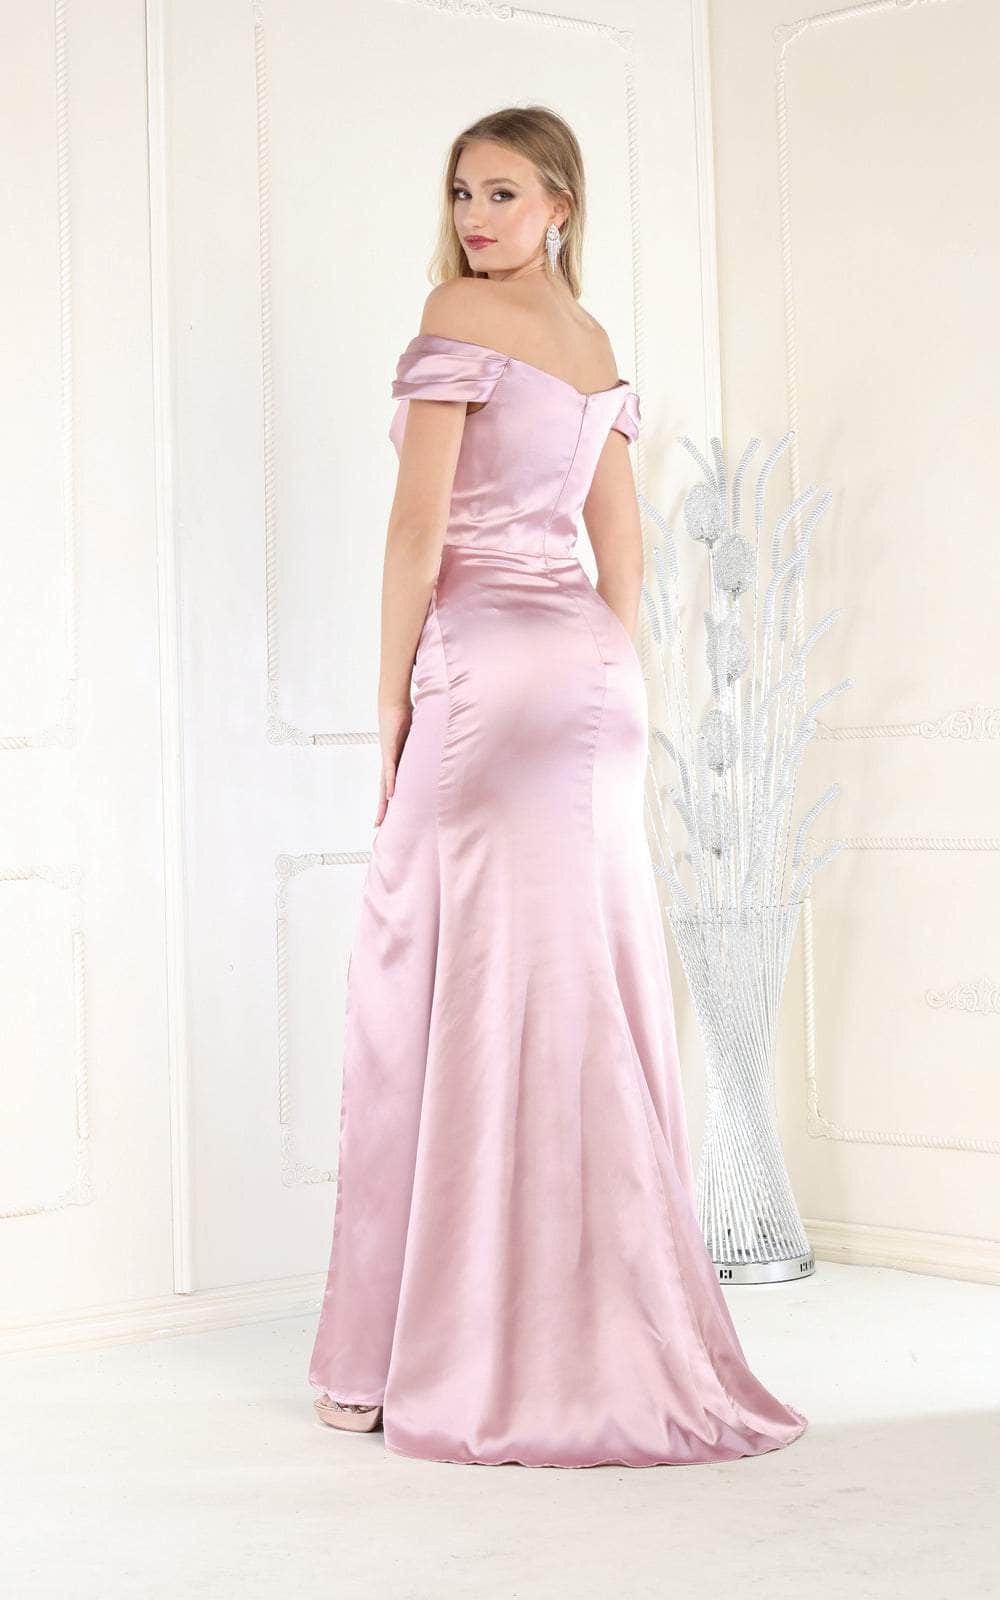 May Queen MQ1997 - Off-Shoulder Ruched Detail Prom Dress Special Occasion Dress